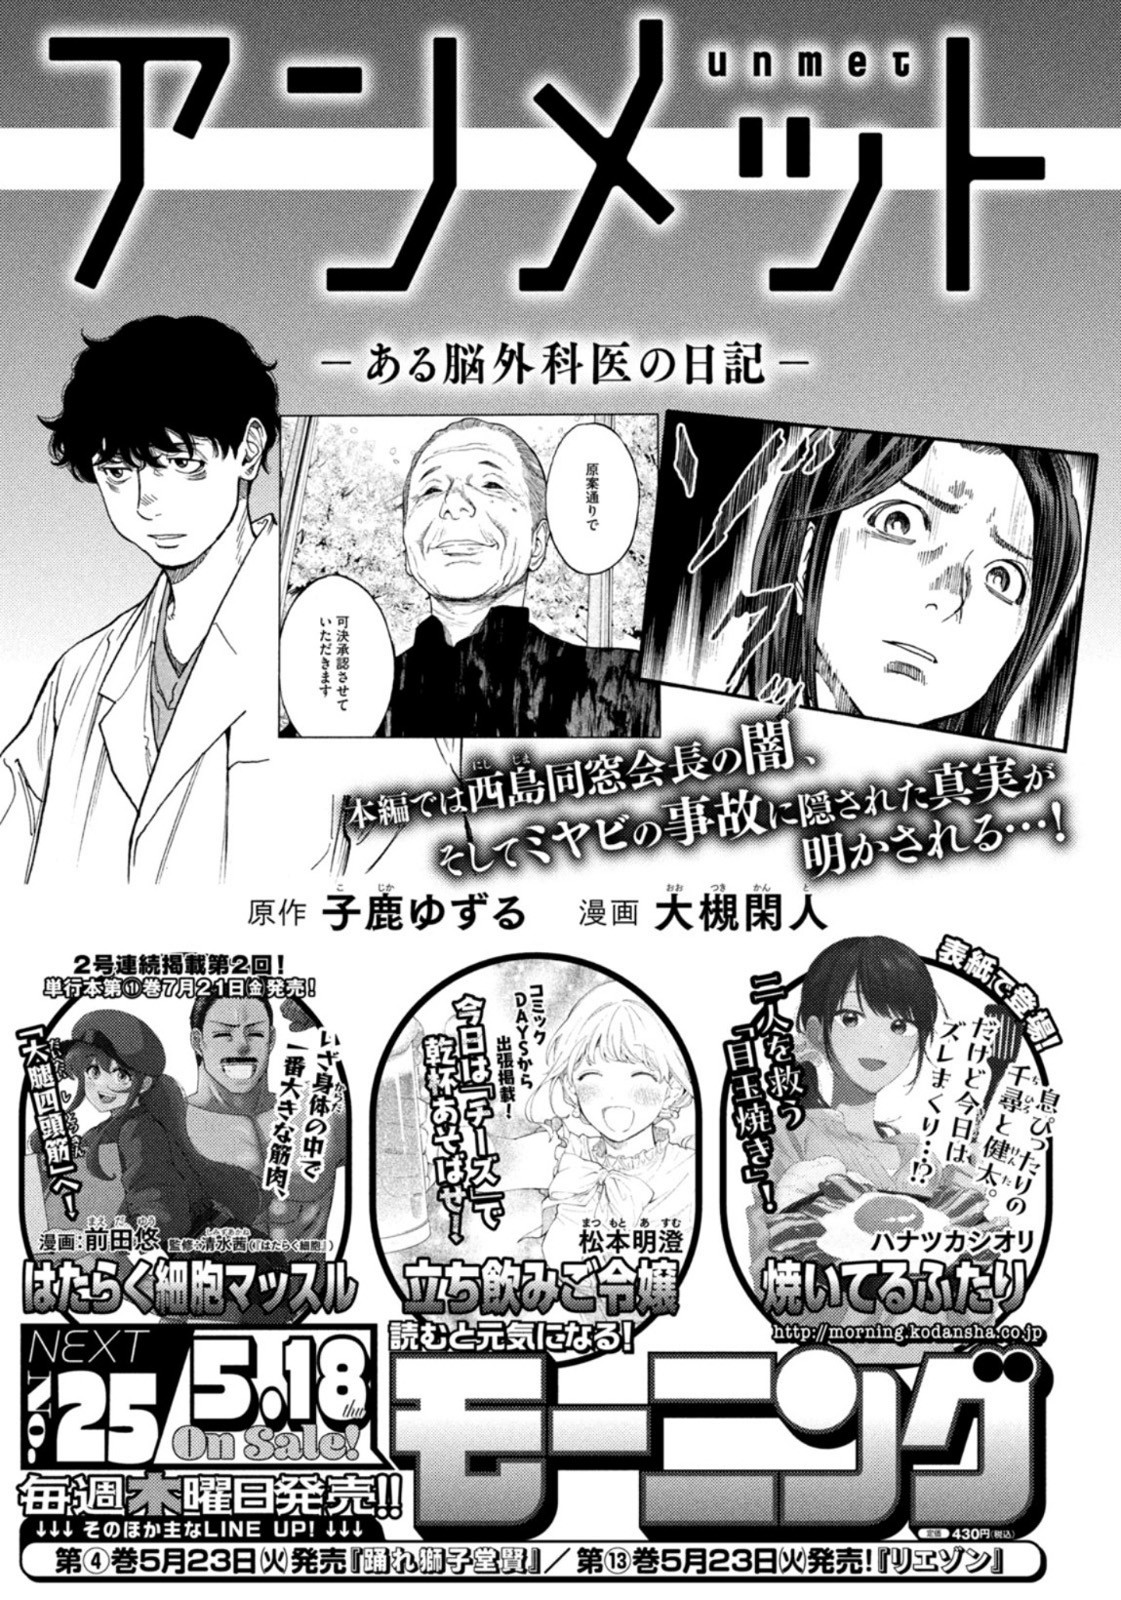 Weekly Morning - 週刊モーニング - Chapter 2023-24 - Page 437